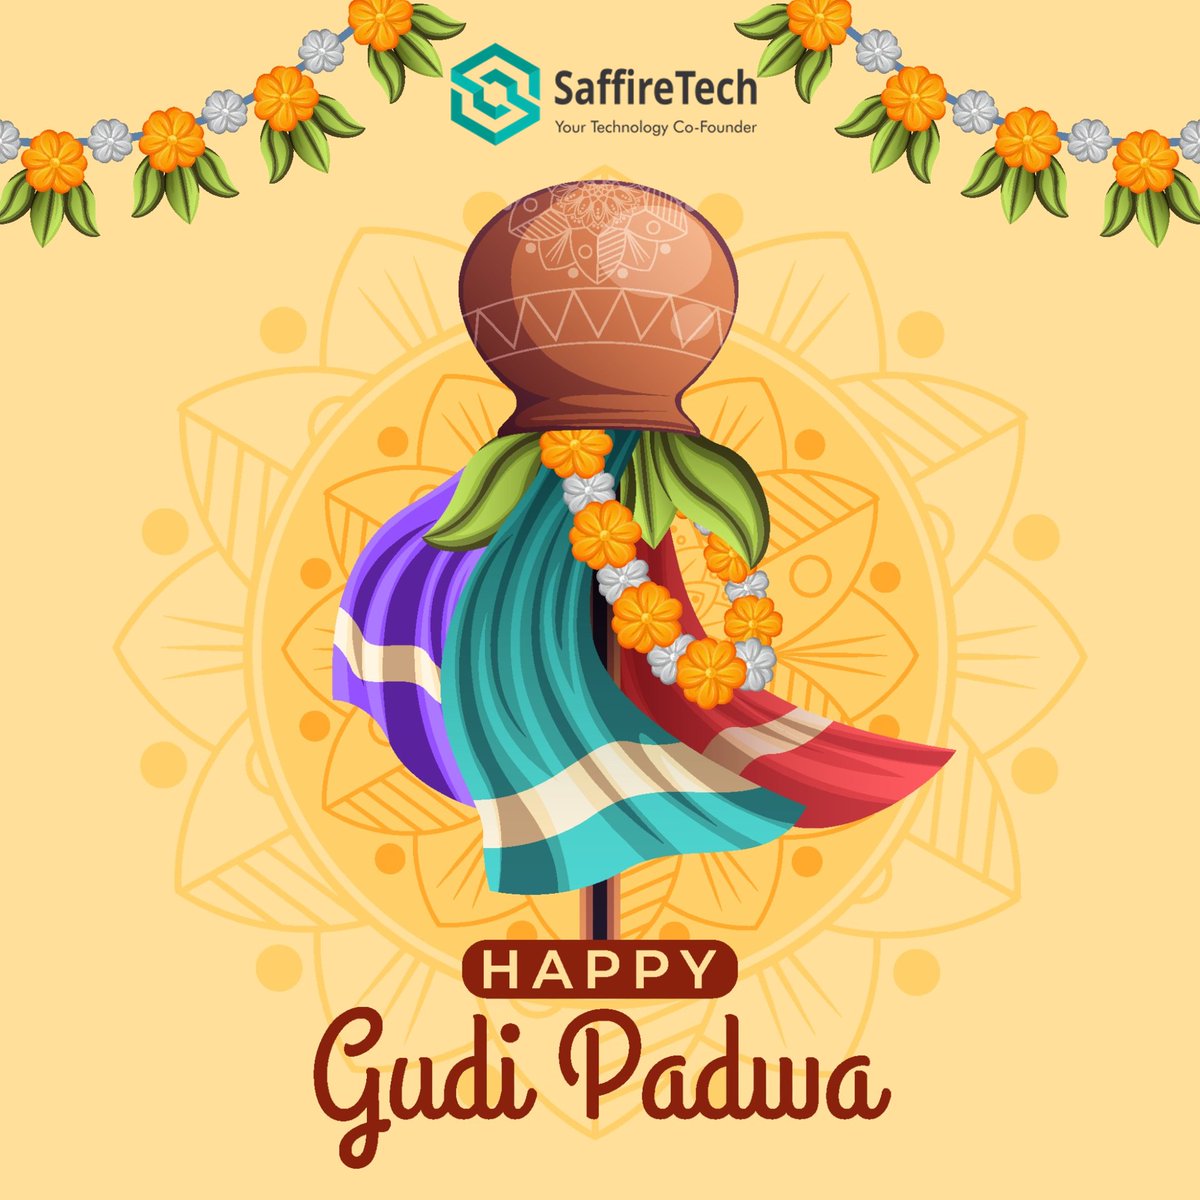 🌟 Wishing everyone a joyous and prosperous Gudi Padwa from the SaffireTech family! May this auspicious occasion fill your lives with happiness, success, and new beginnings. 🎉✨🪔🌸

#GudiPadwa #FestiveGreetings #NewBeginnings #SaffireTech